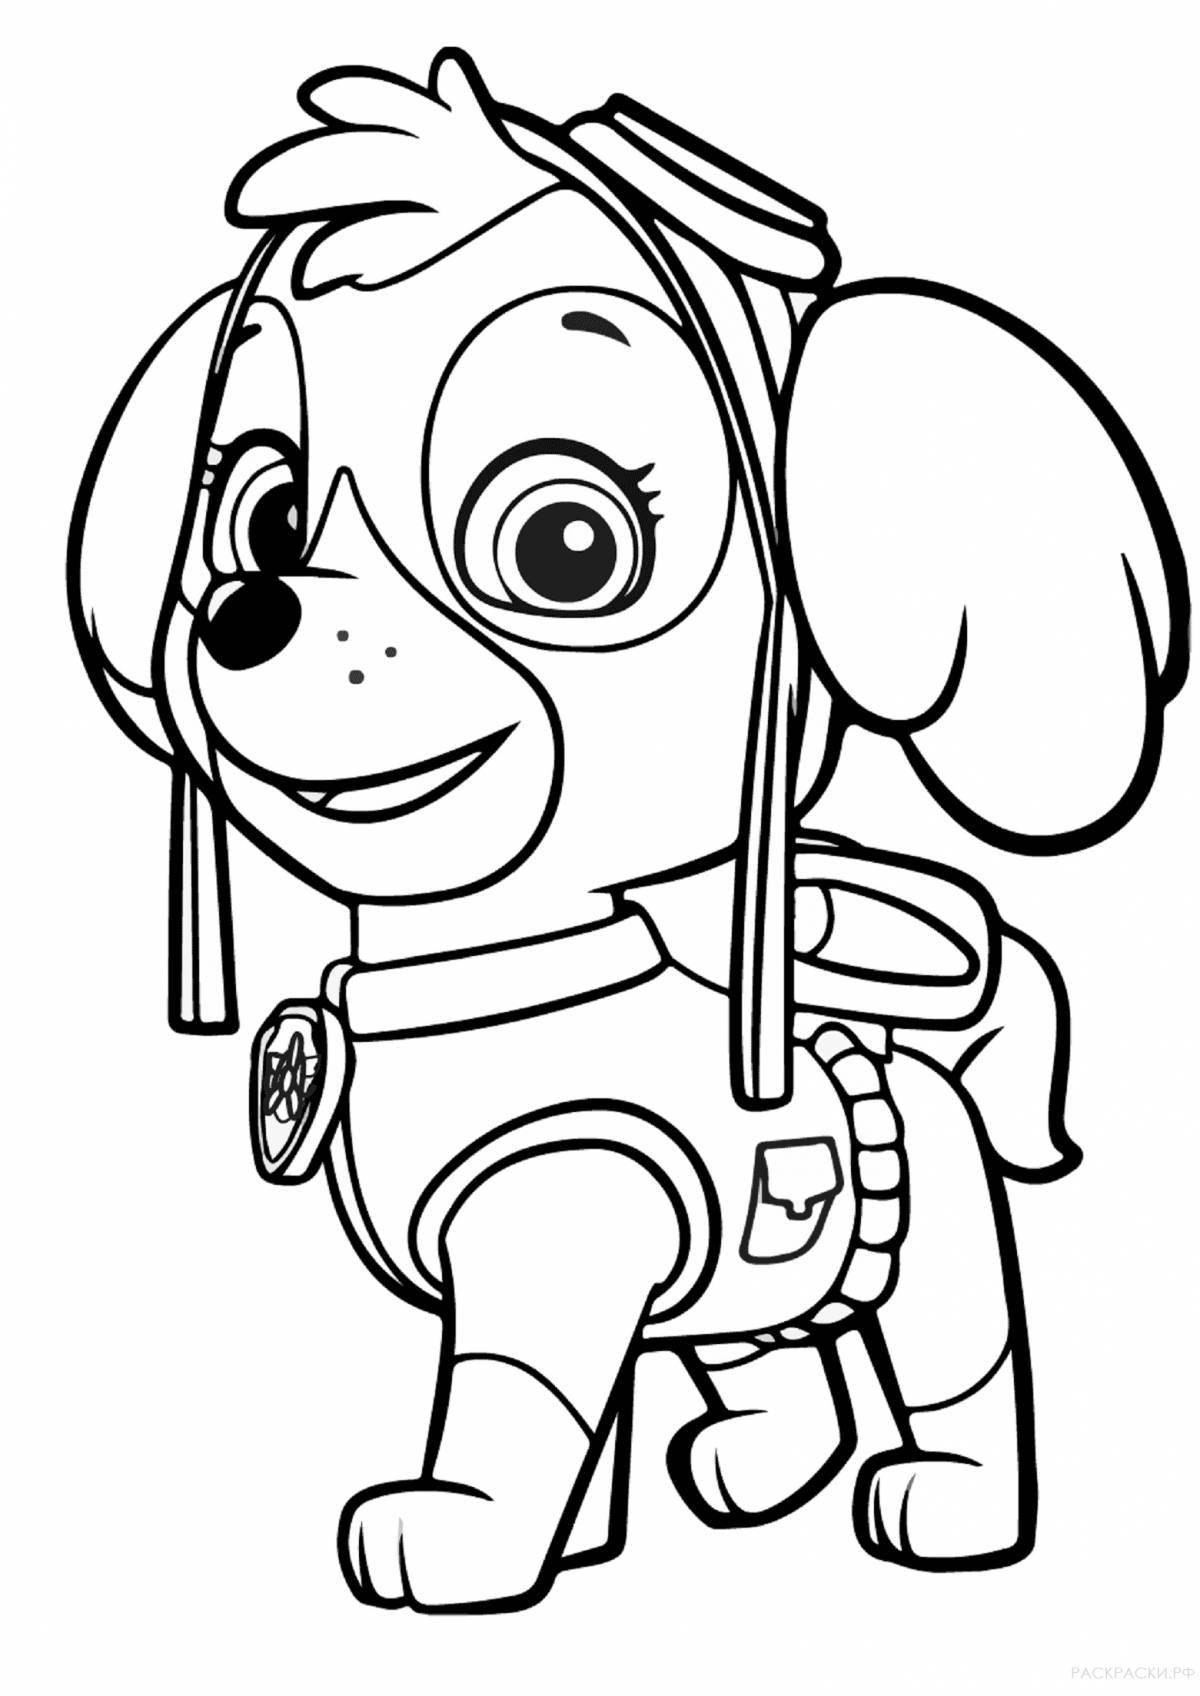 Puppy patrol fun coloring book for 5 year olds